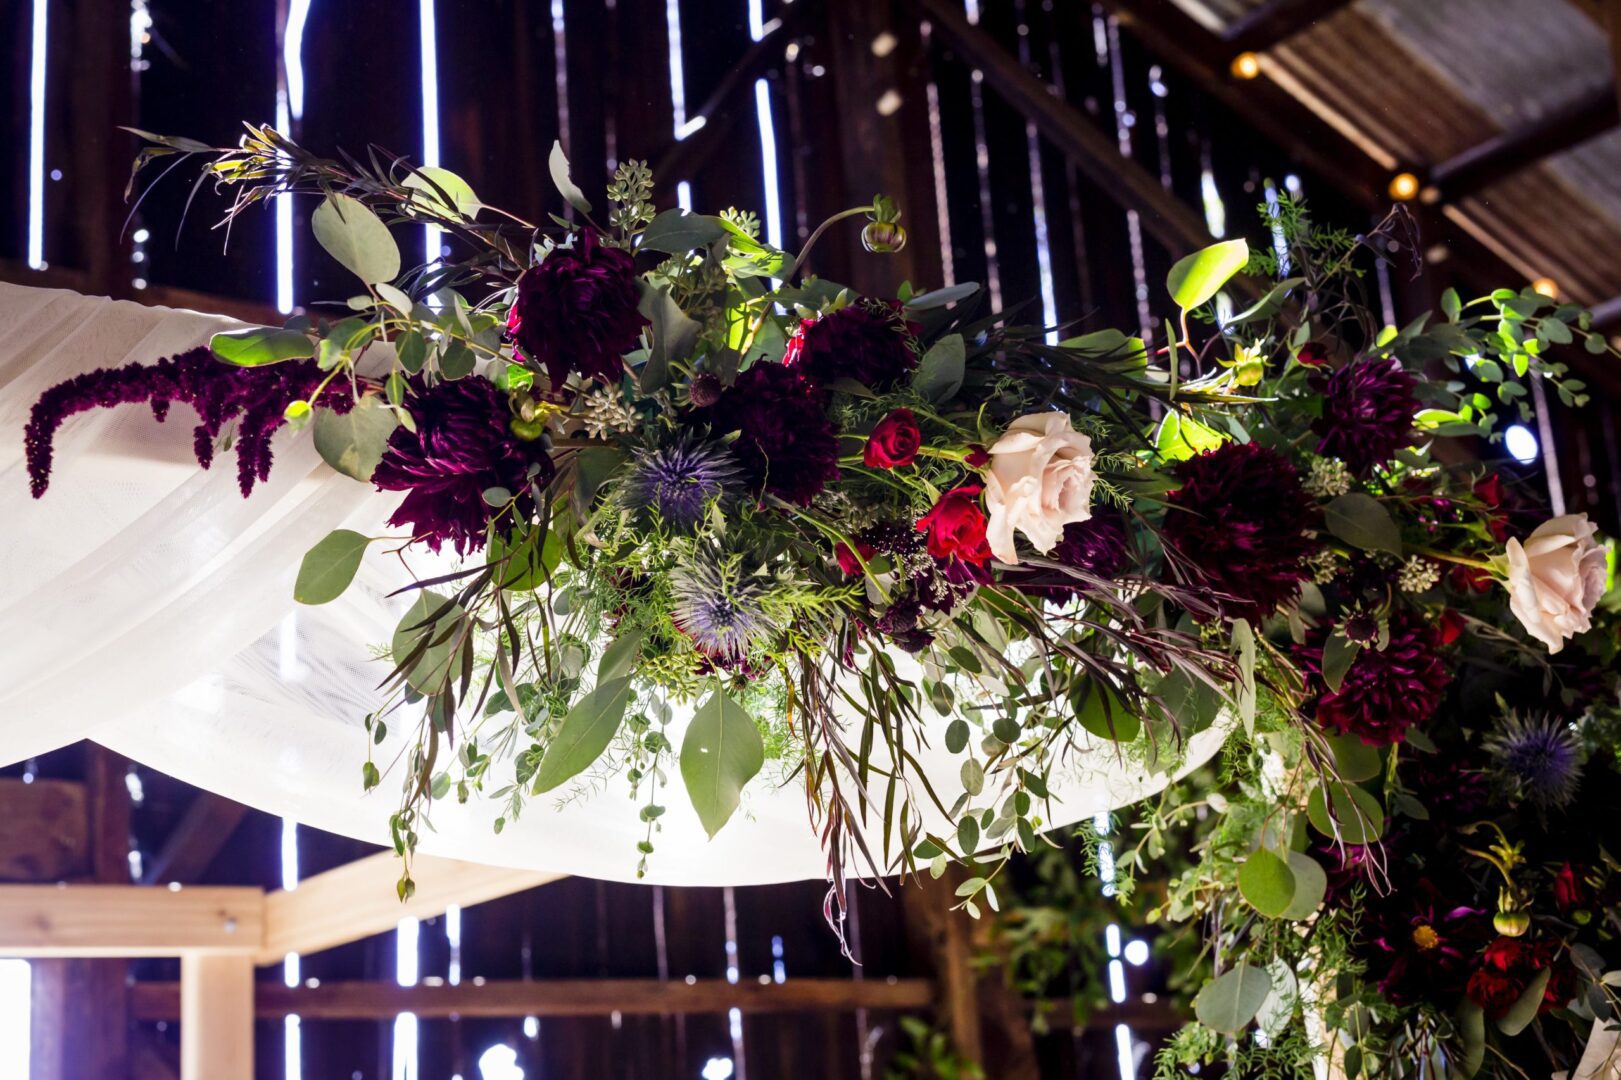 A wedding arch decorated with flowers and greenery.